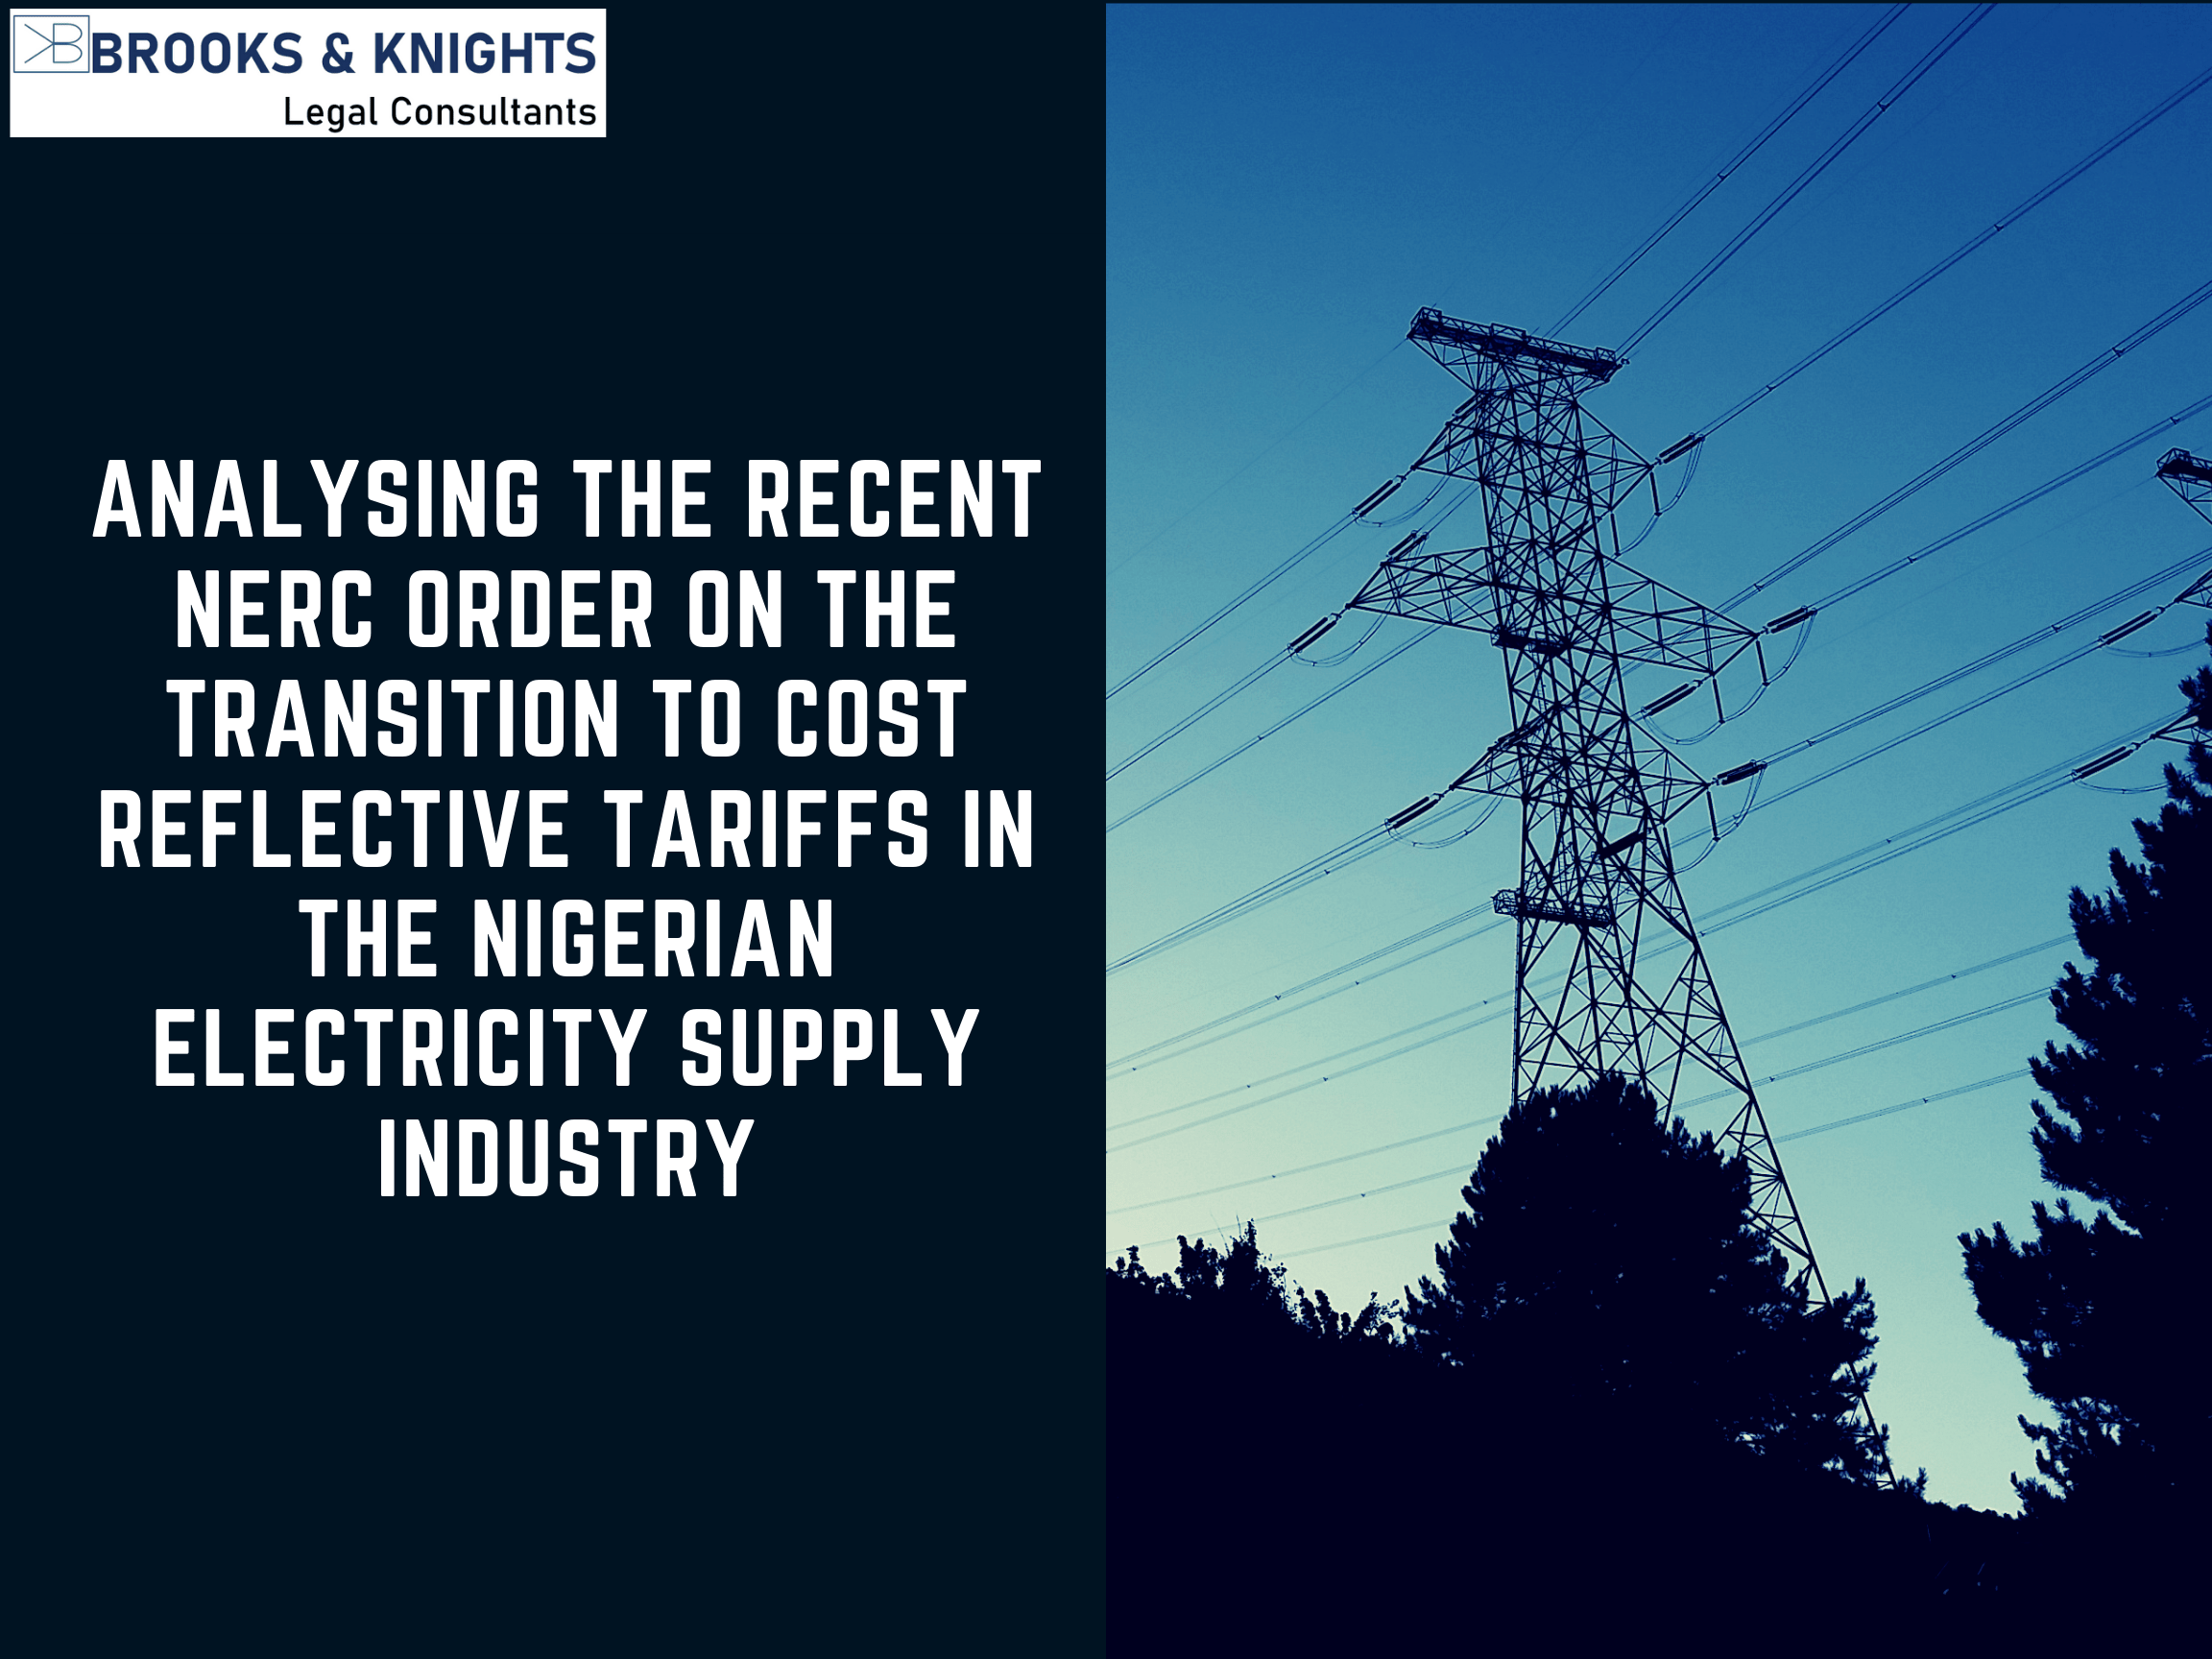 Analysing the Recent NERC Order on the Transition to Cost Reflective Tariffs in Nigerian Electricity Supply Industry (NESI)